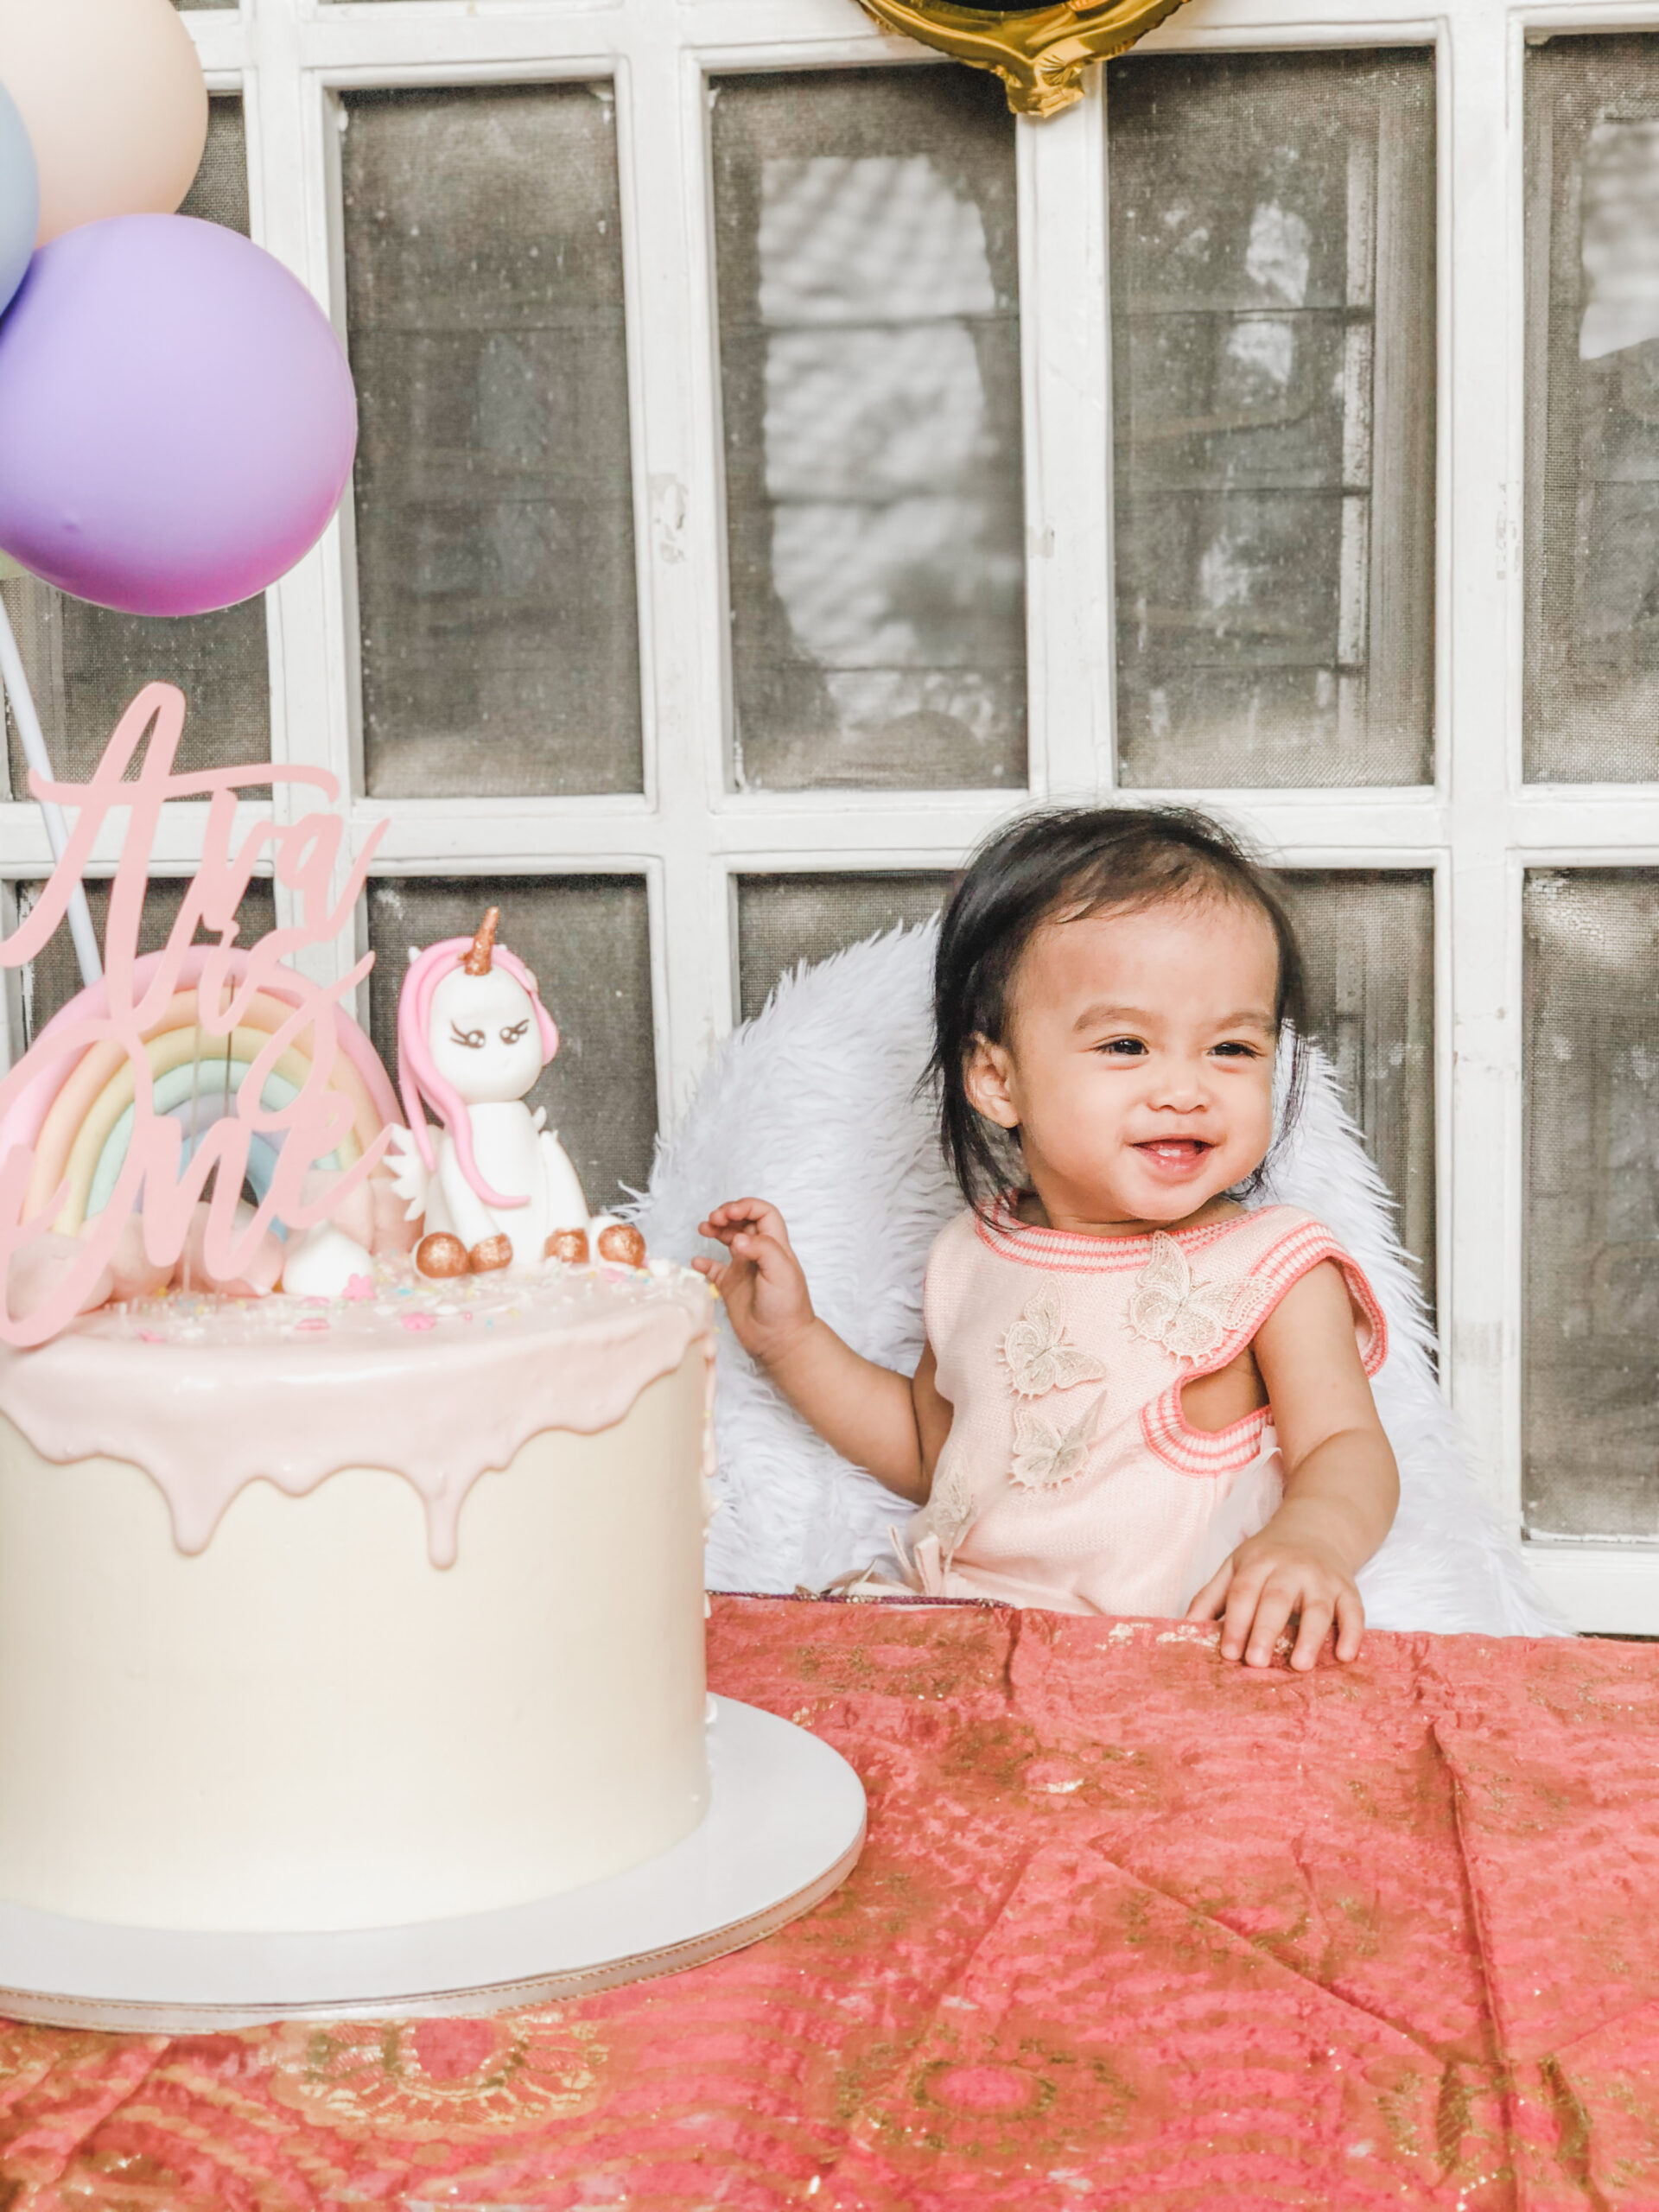 You are currently viewing Ava’s Christening and Unicorn-themed Birthday Party